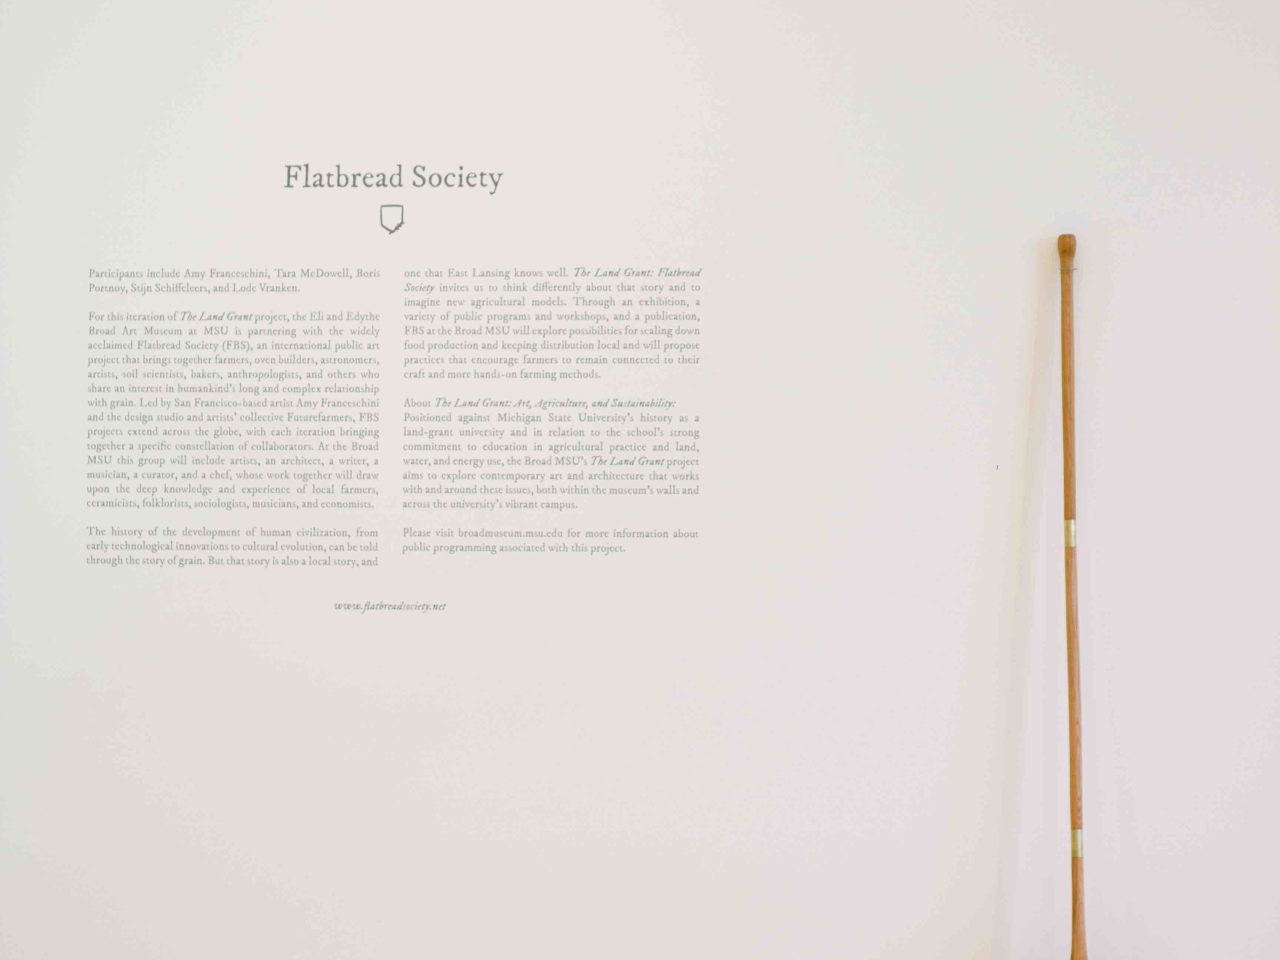 Installation view of The Land Grant: Flatbread Society